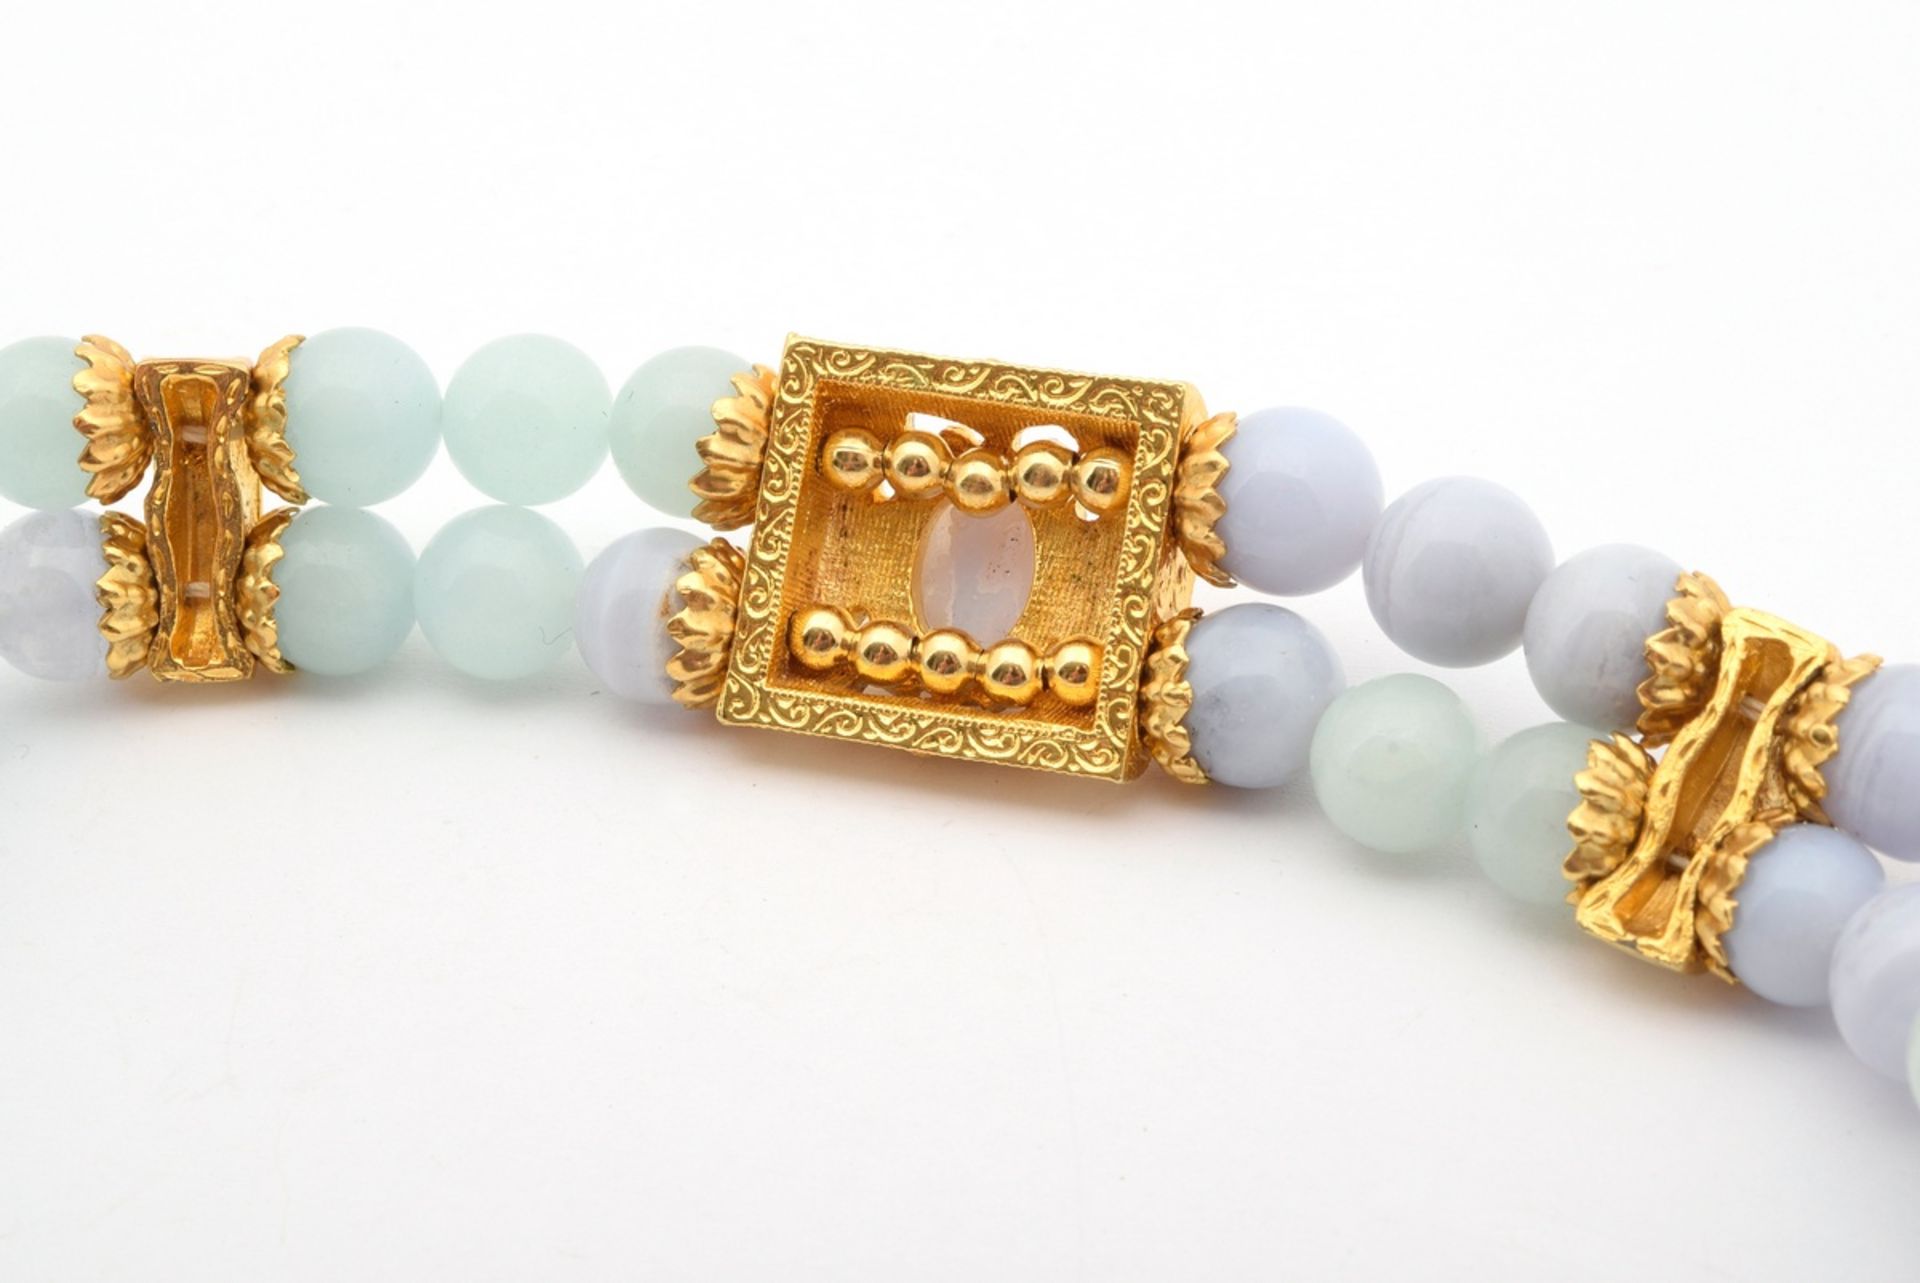 6 pieces of gold-plated light blue/beige fashion/costume jewellery made of glass and artificial pea - Image 9 of 12